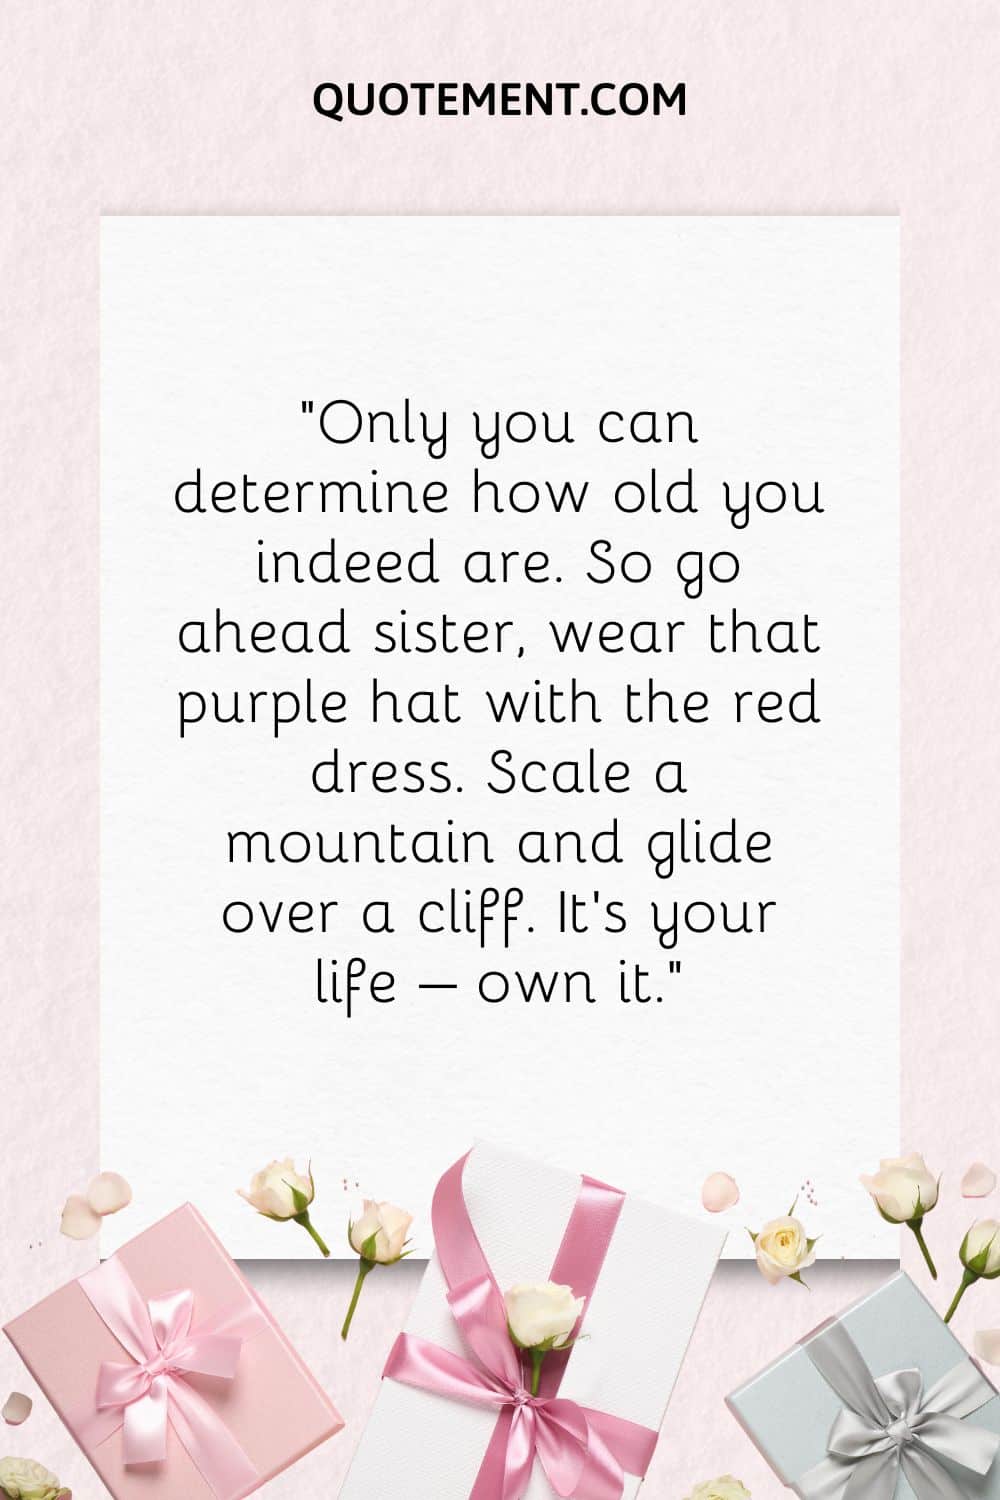 “Only you can determine how old you indeed are. So go ahead sister, wear that purple hat with the red dress. Scale a mountain and glide over a cliff. It’s your life – own it.”